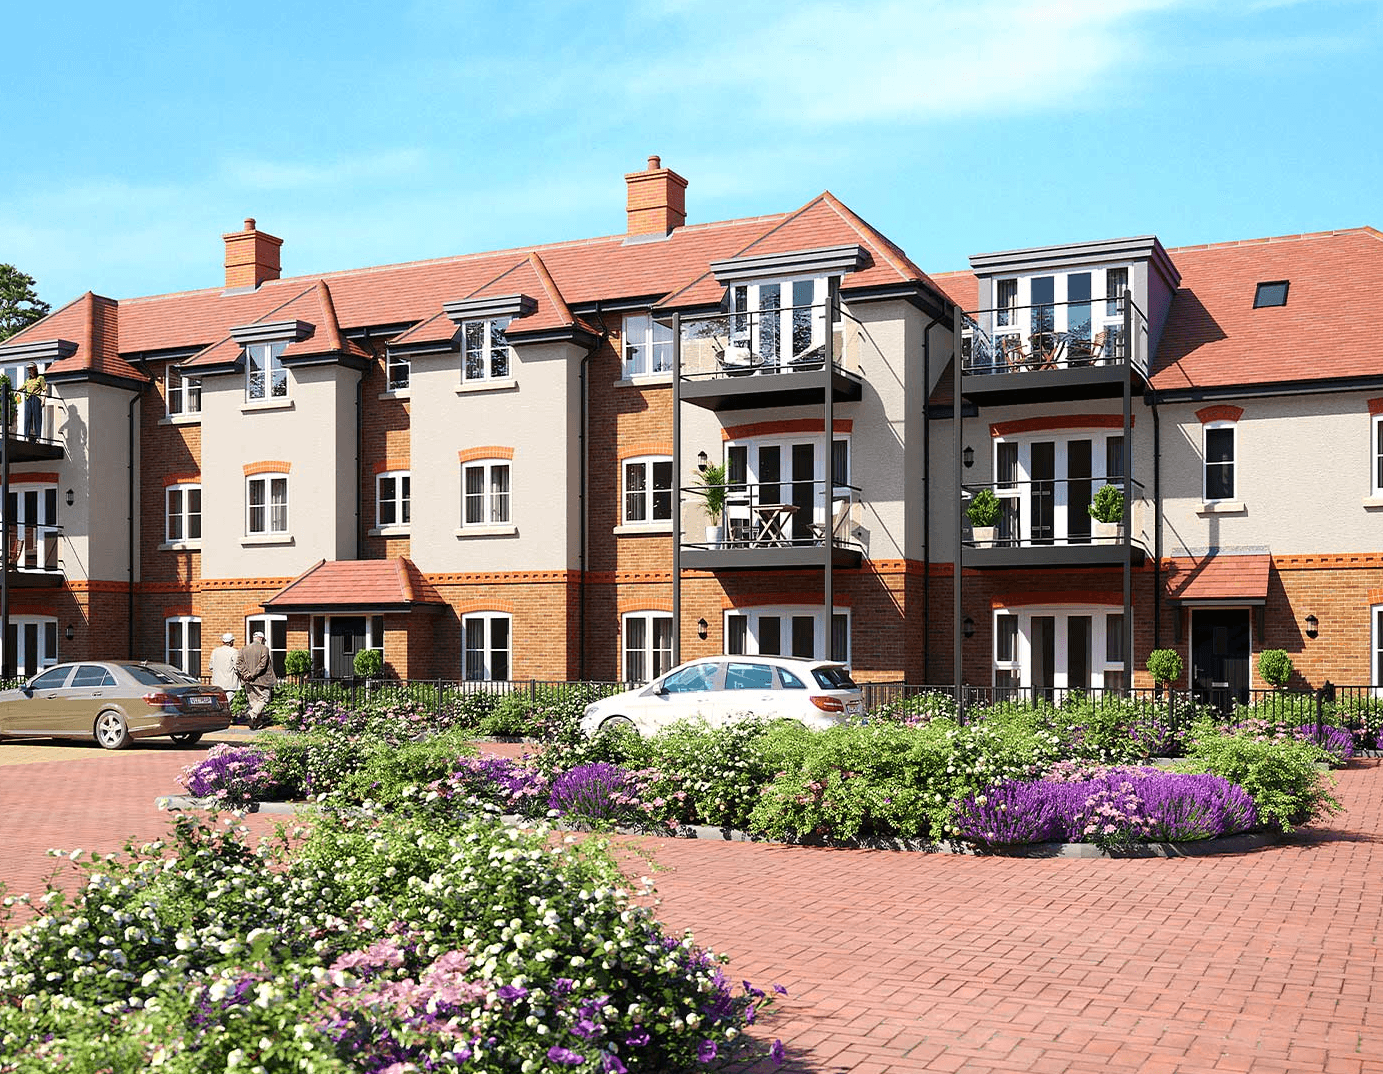 Exterior of Longcross Place in Wallingford, Oxfordshire